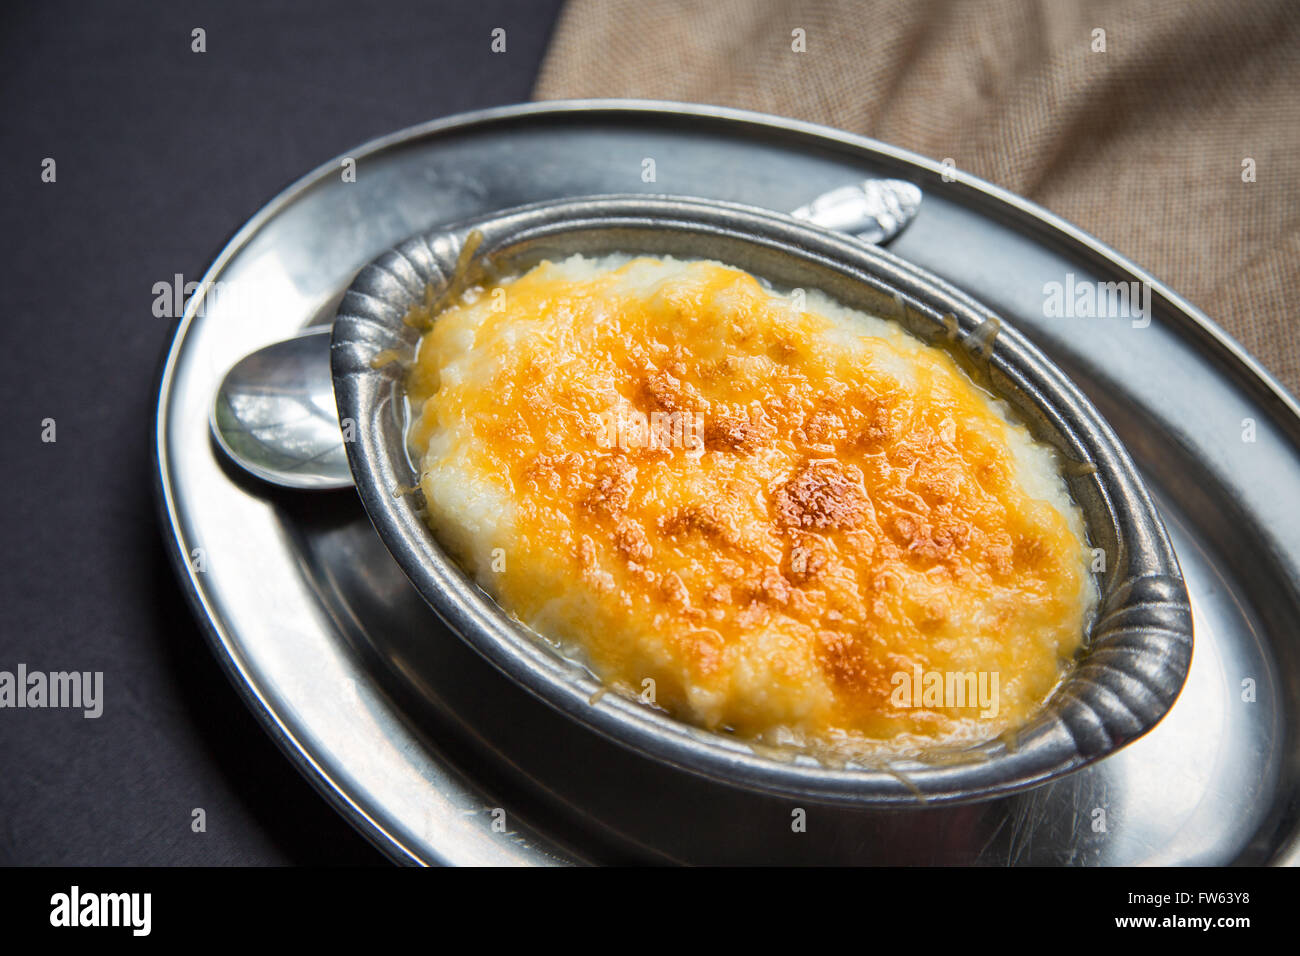 Overhead shot of hominy grits baked with cheddar cheese in a small antique pewter serving bowl. Stock Photo